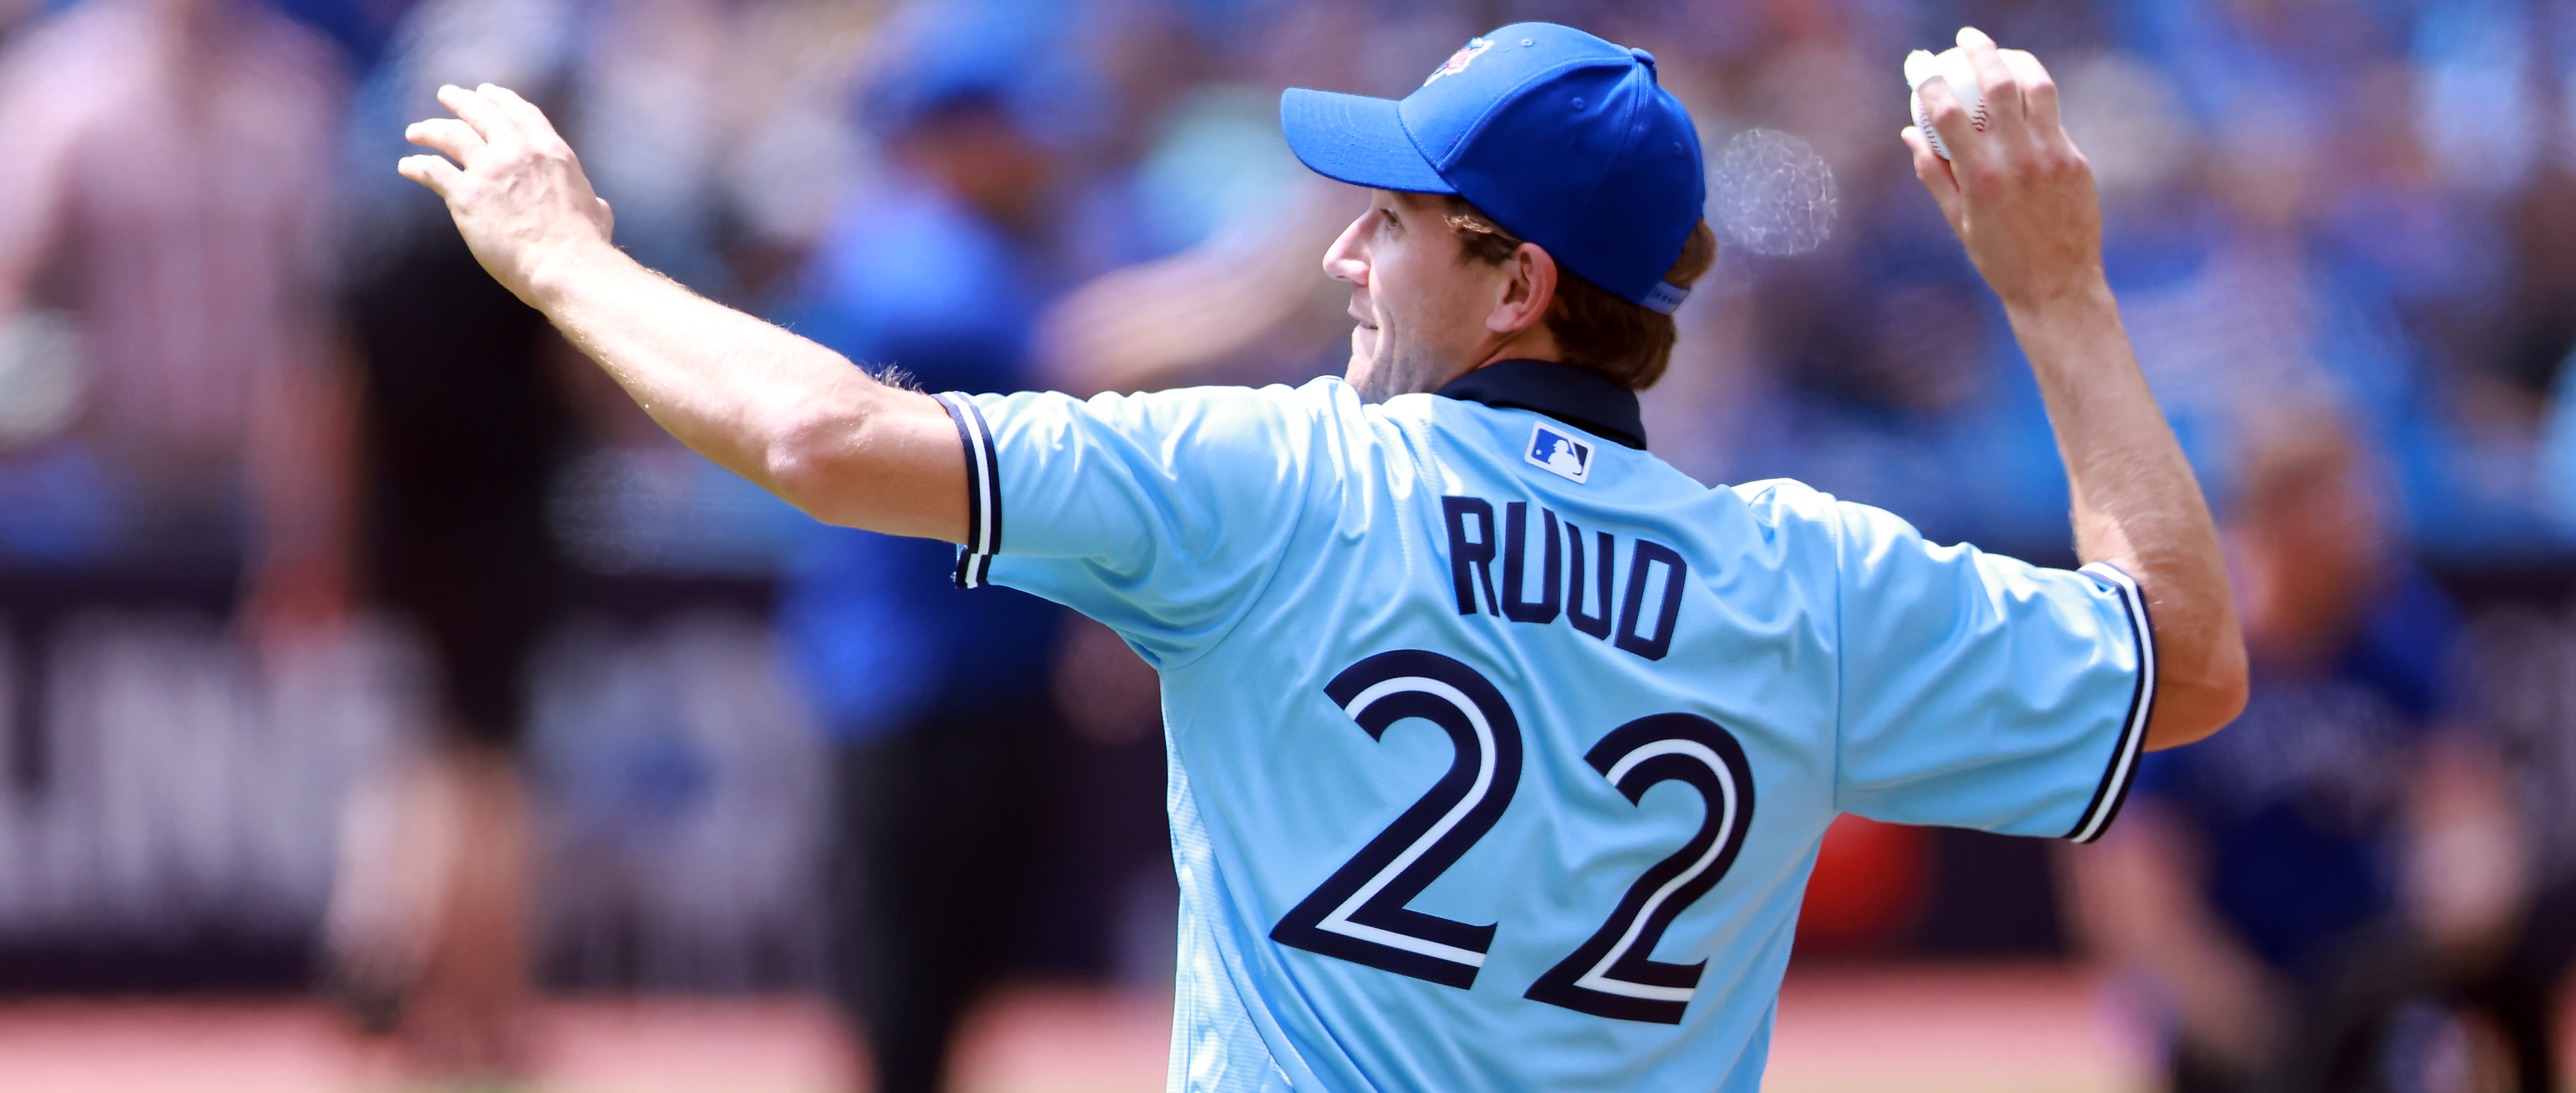 Casper Ruud Throws First Pitch At Toronto Blue Jays Game, ATP Tour